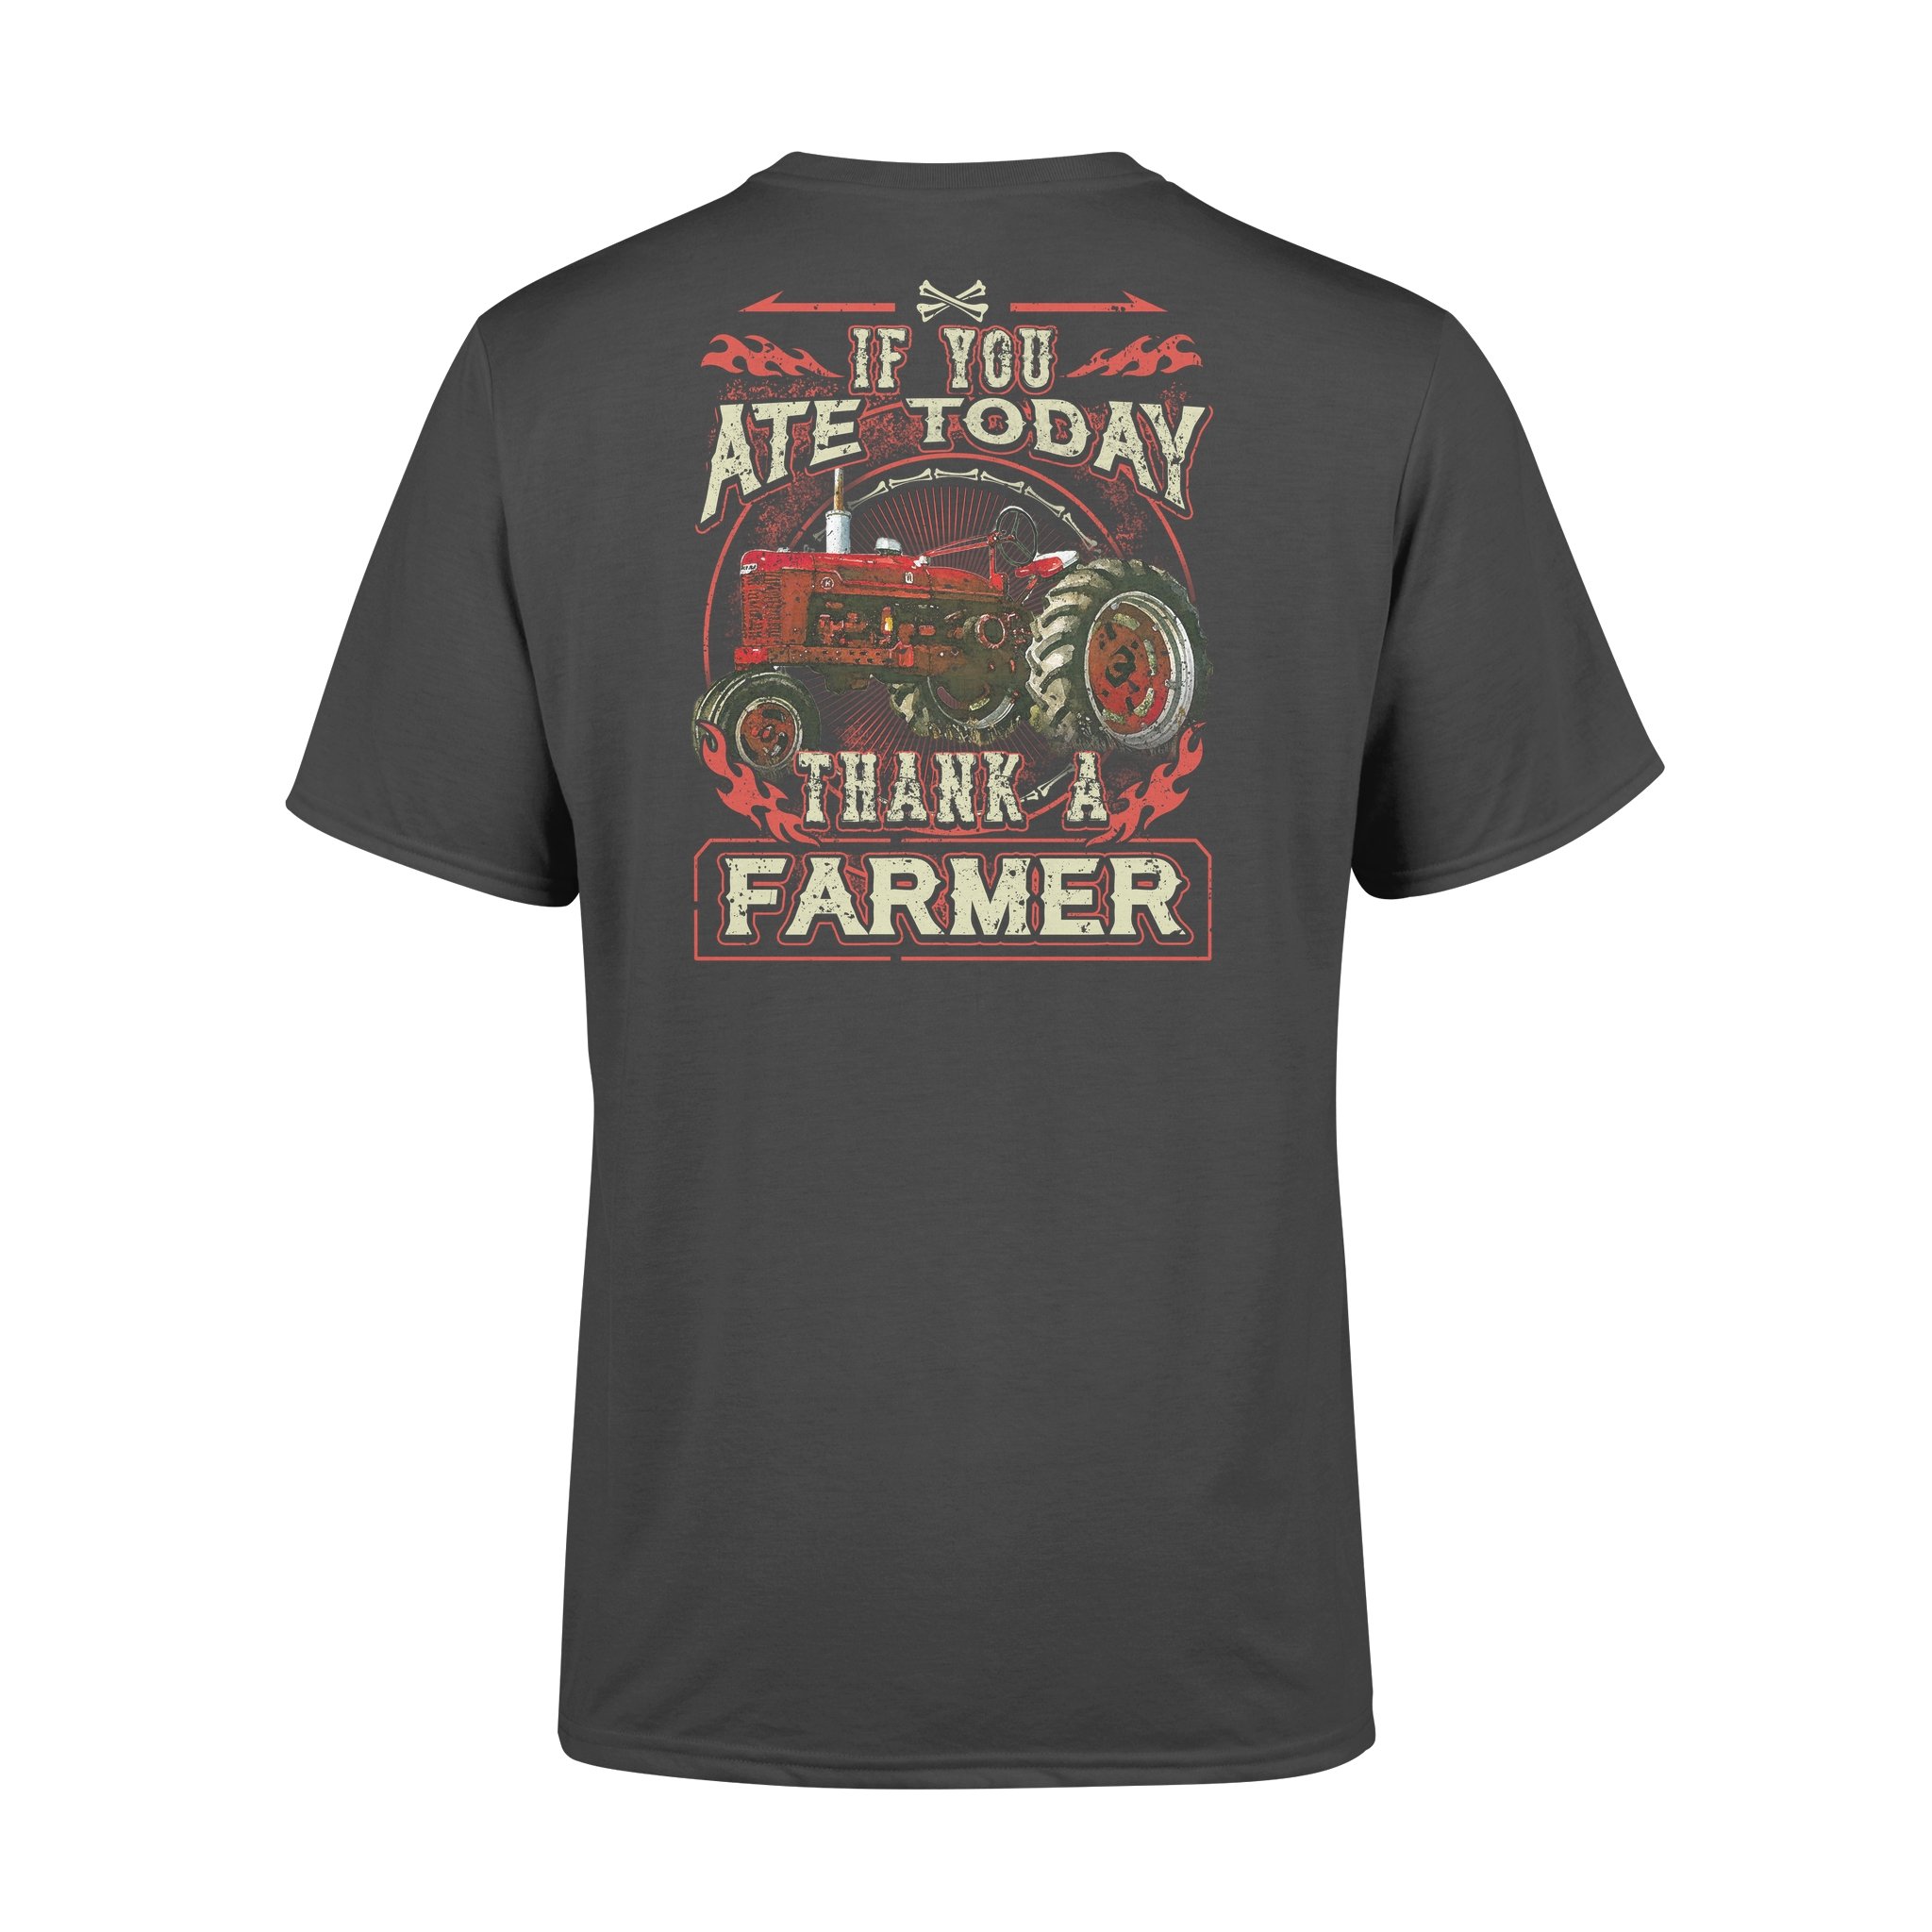 Farm – If You Ate Today – T-shirt